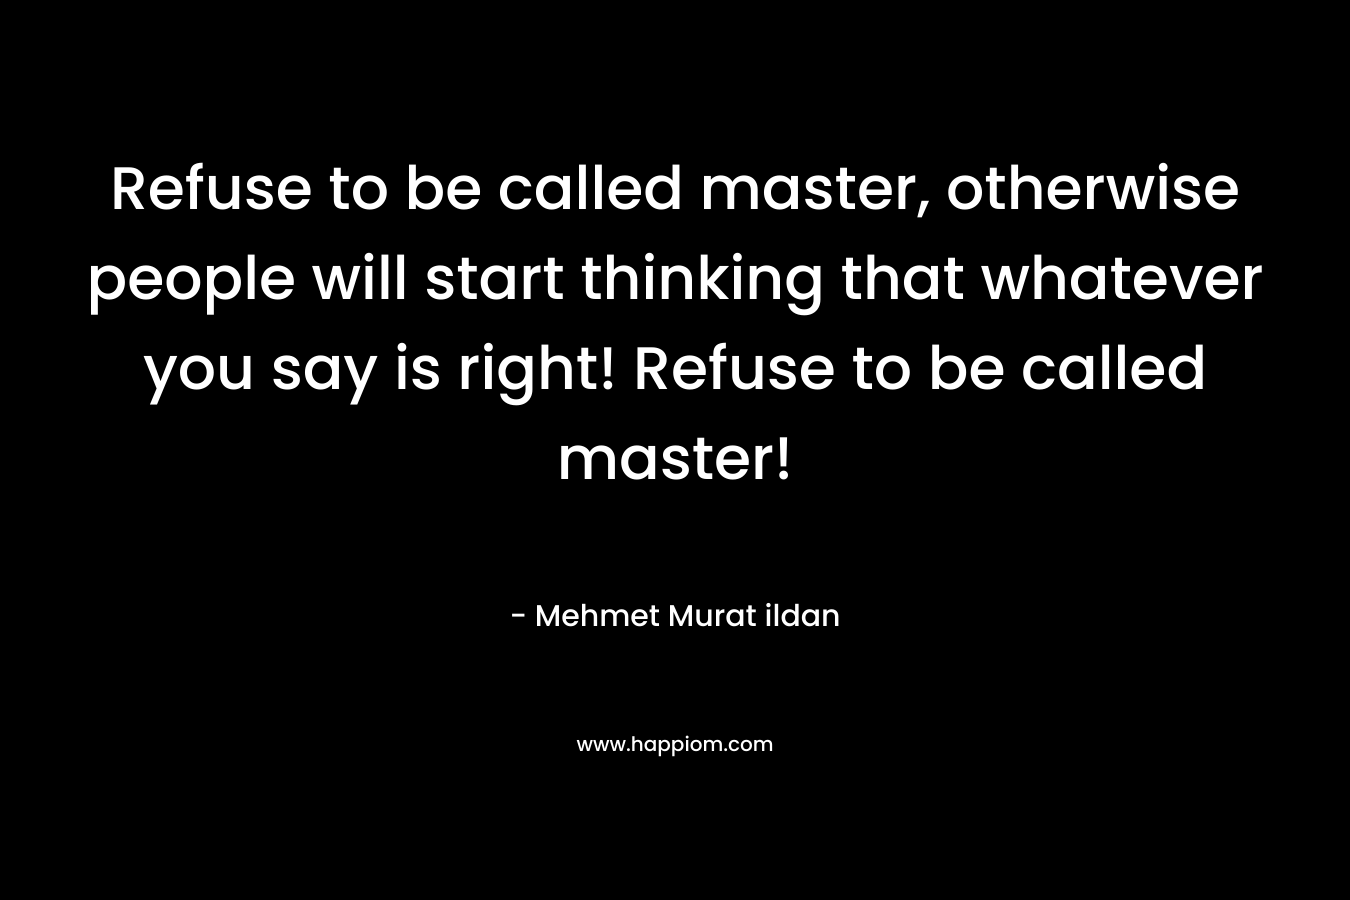 Refuse to be called master, otherwise people will start thinking that whatever you say is right! Refuse to be called master!